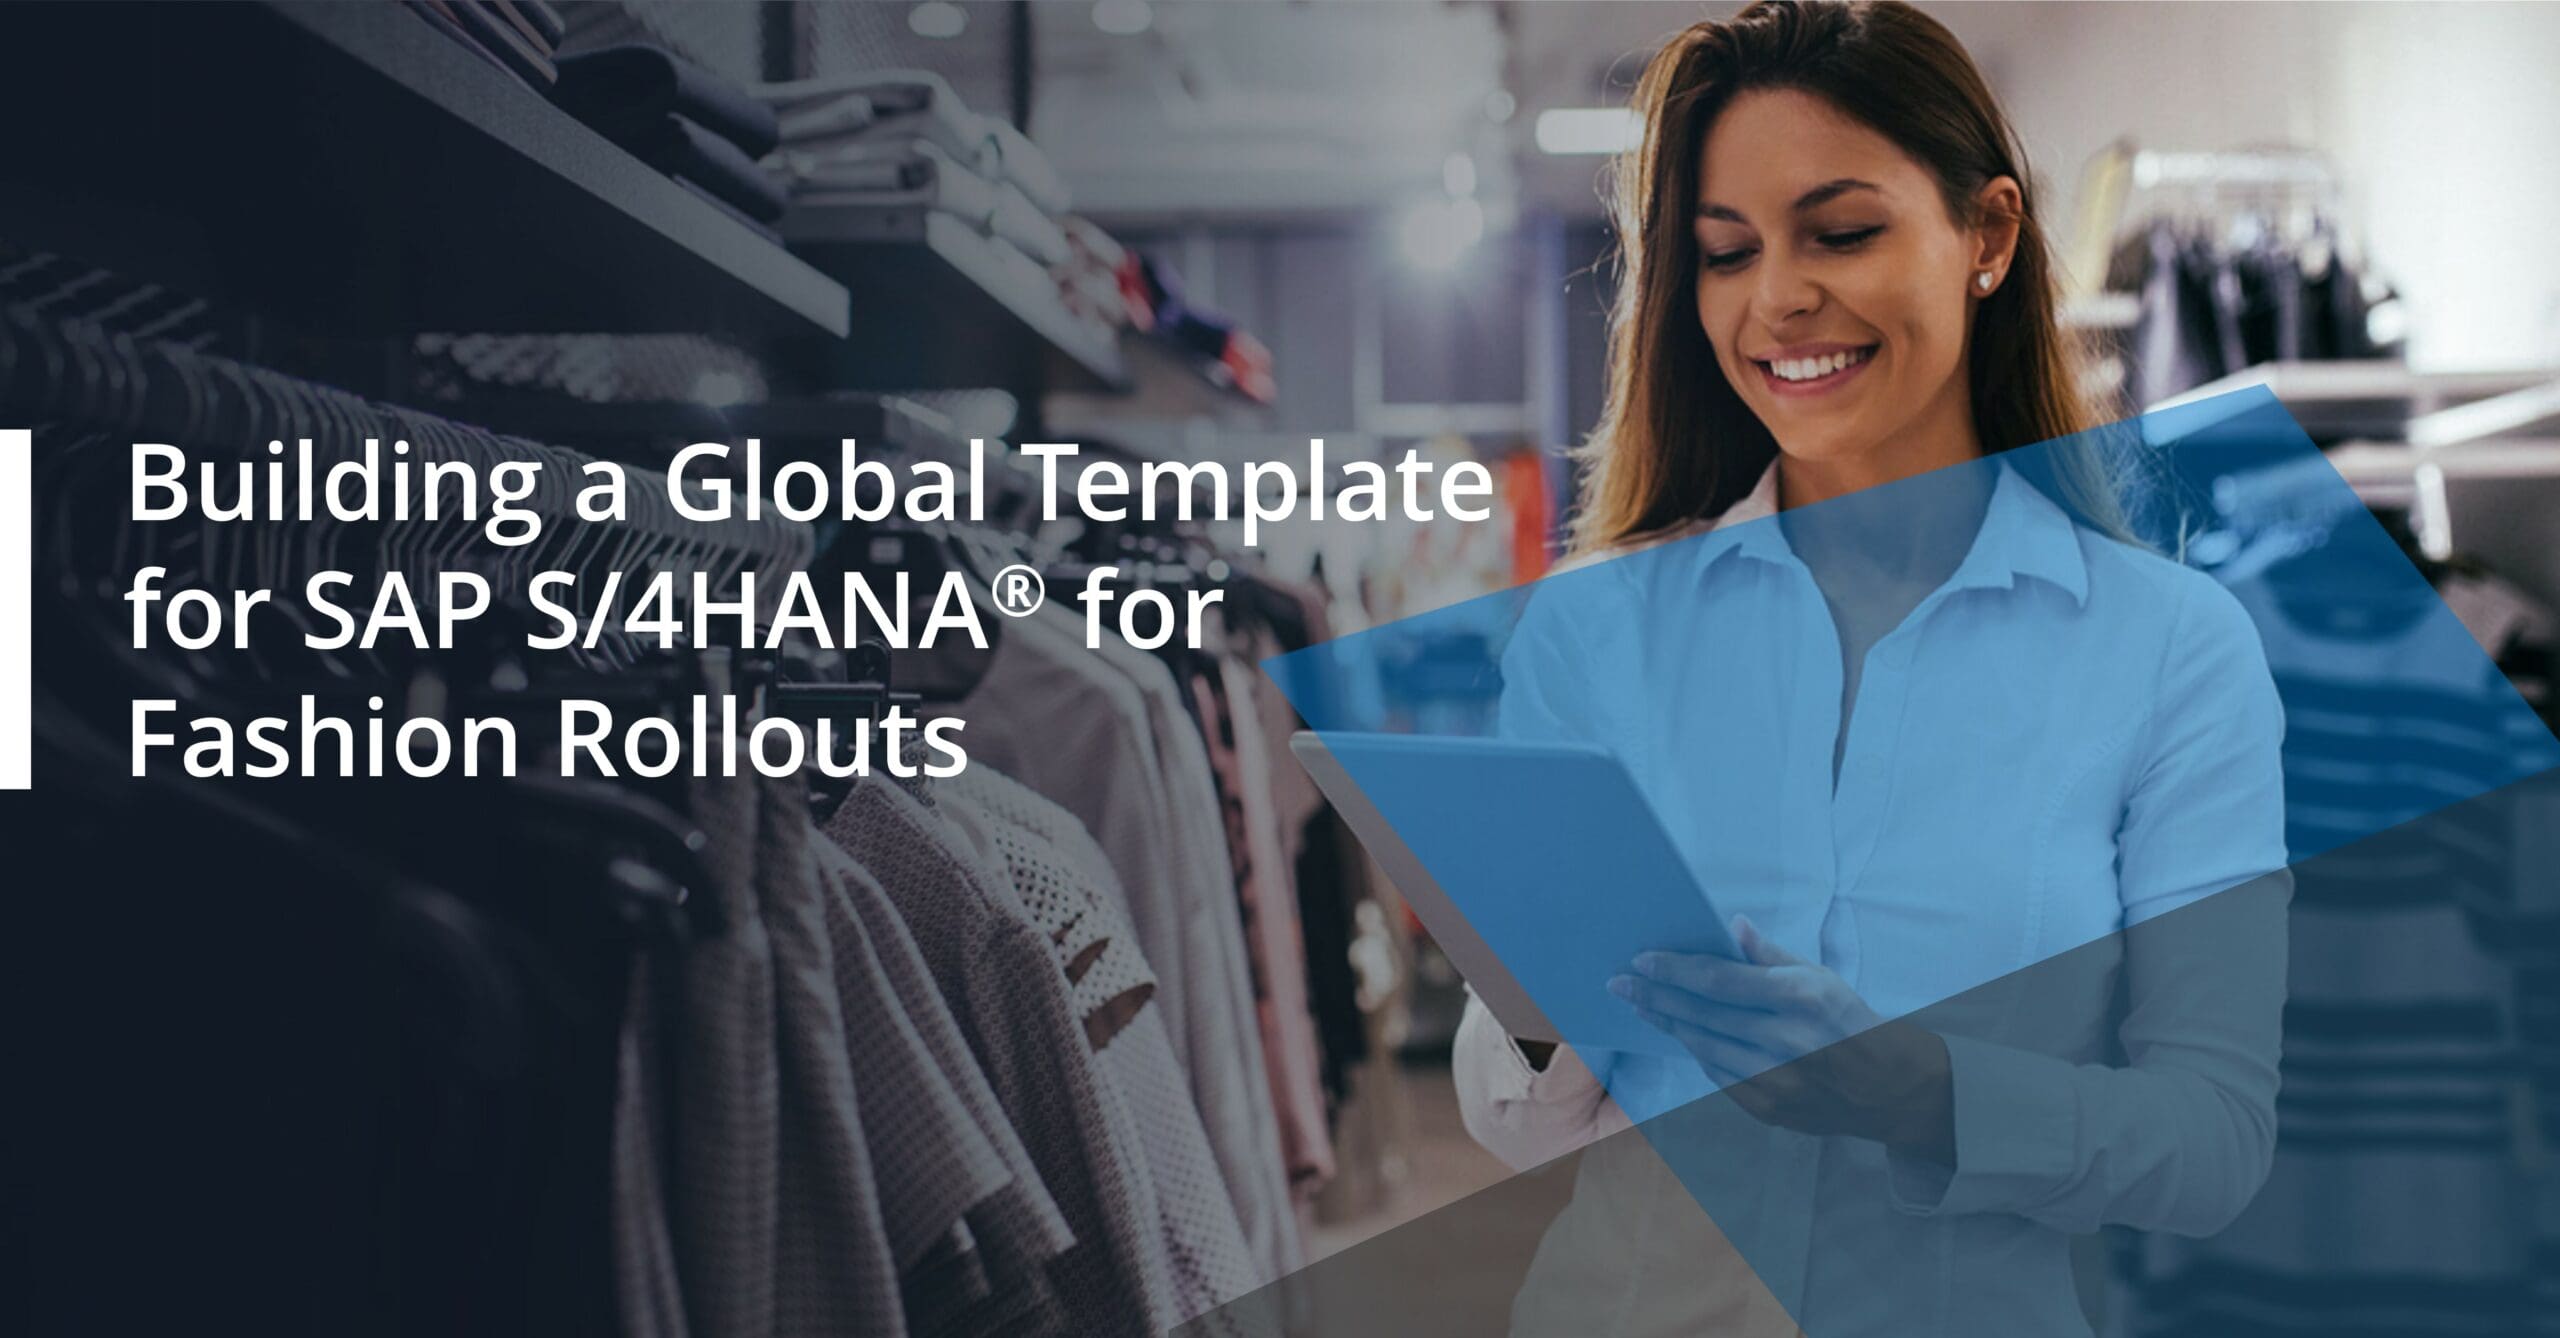 Considerations for Building a Global Template for SAP S/4HANA Rollouts